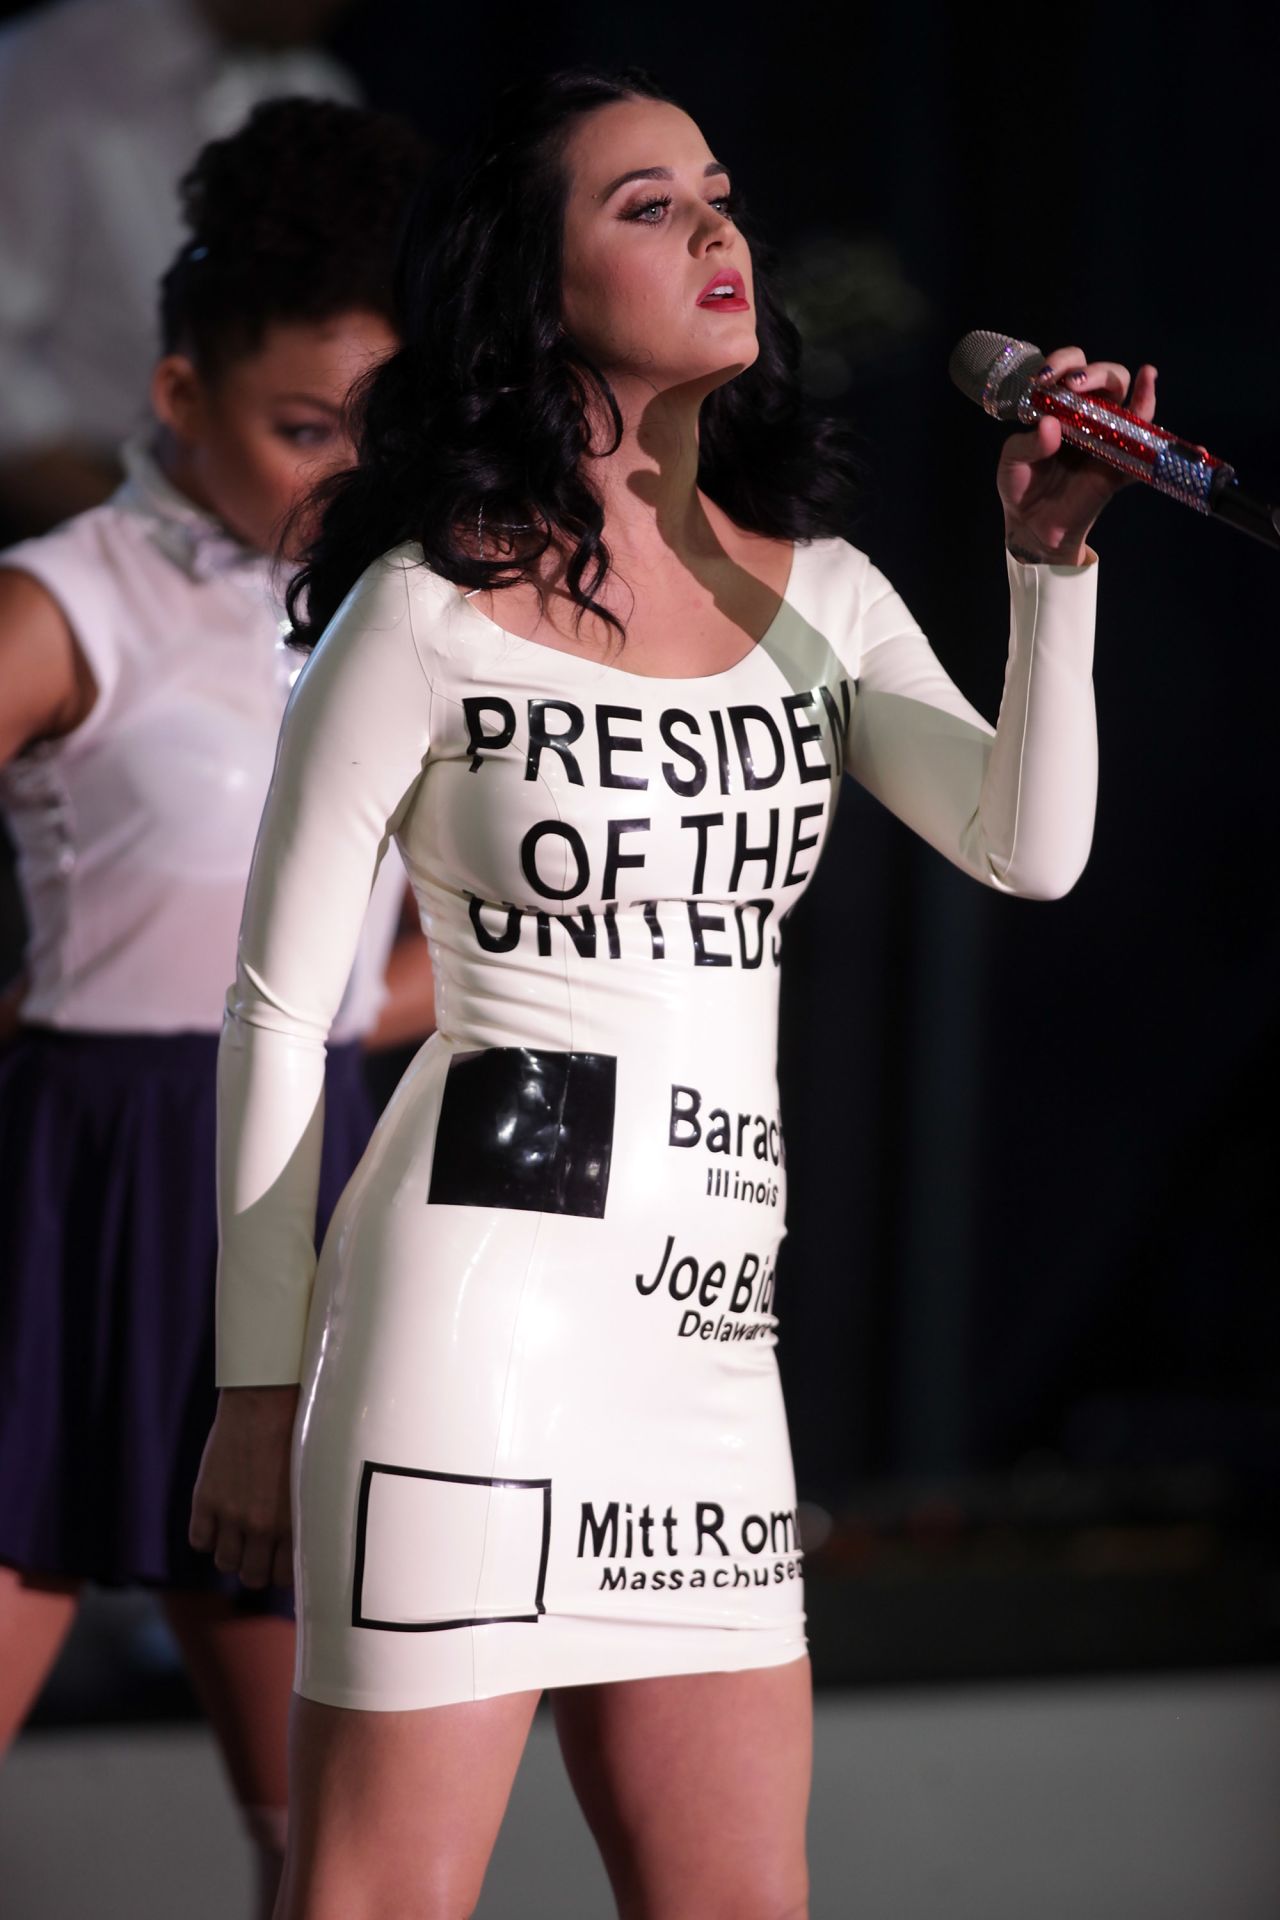 Perry gets political in a white latex ballot dress at a campaign rally for President Barack Obama on Wednesday, October 24, 2012, in Las Vegas.